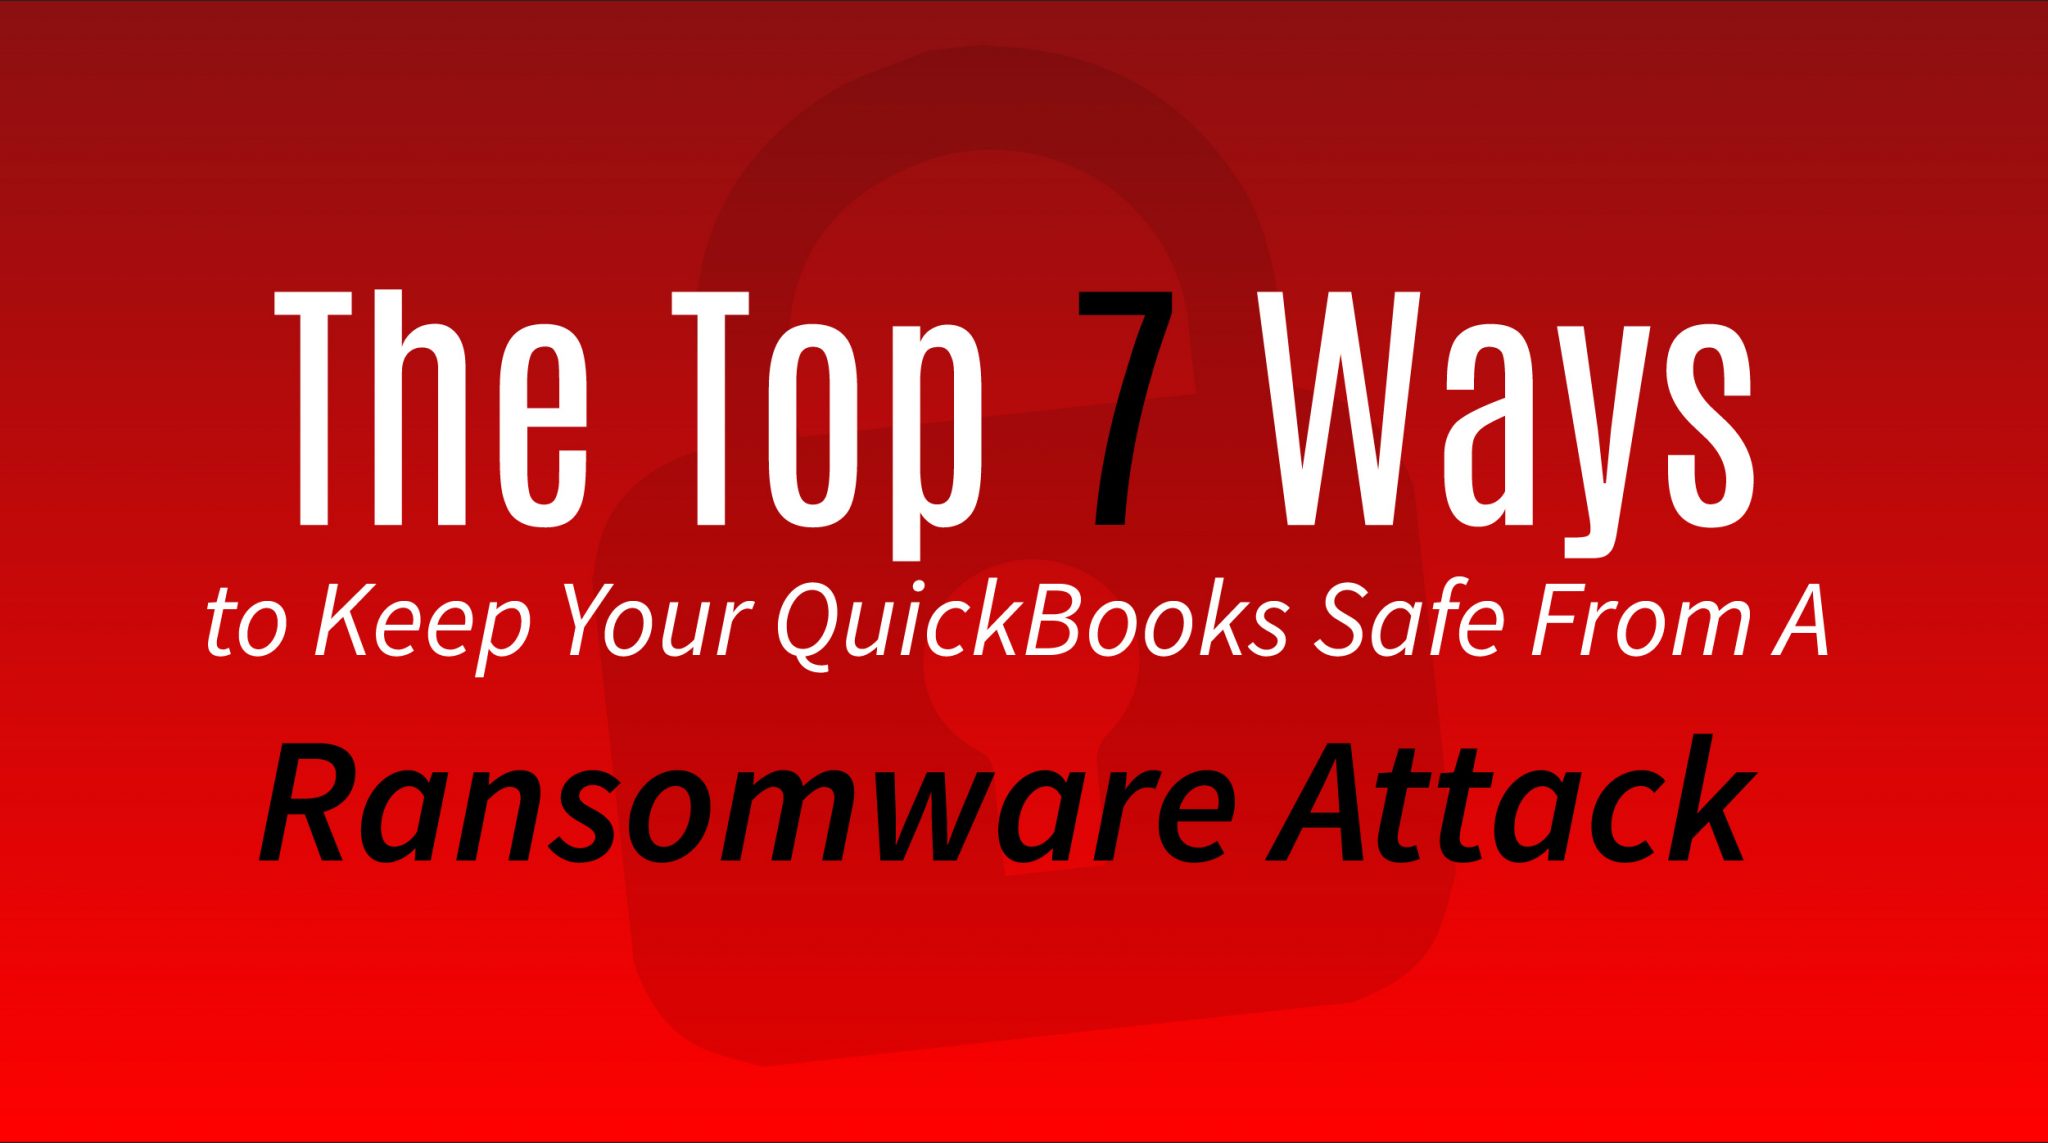 Keep QuickBooks Safe From Ransomware